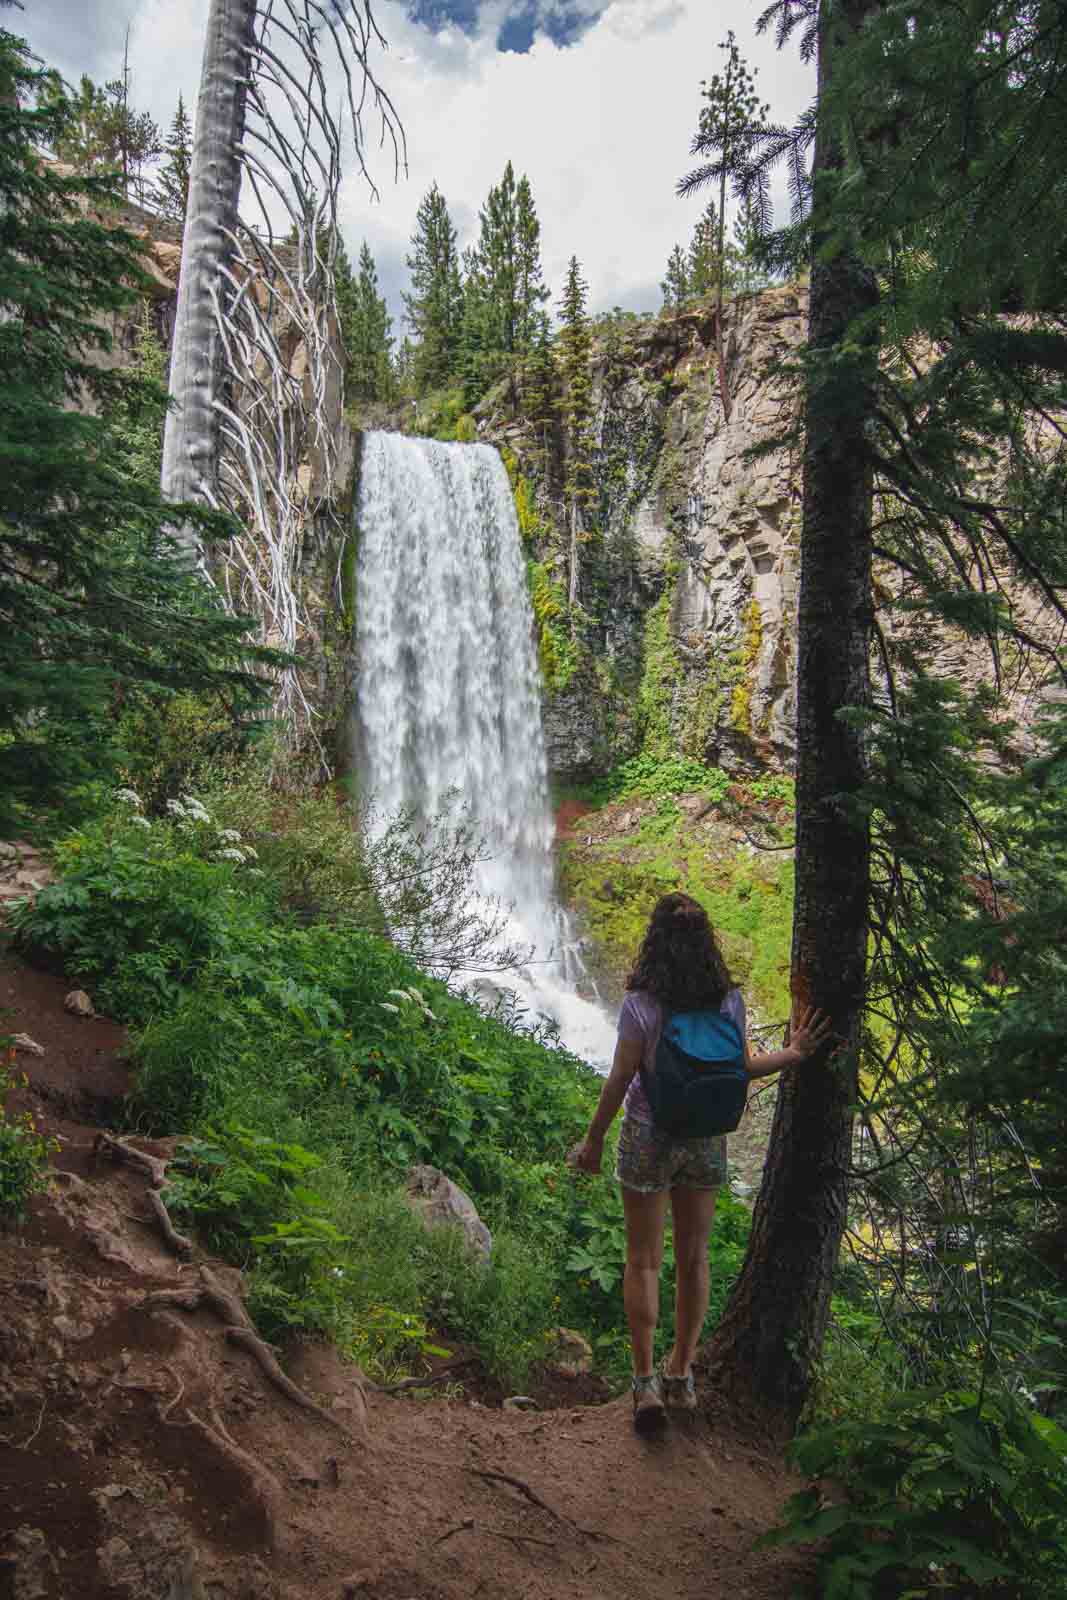 Visit the bottom of Tumalo Falls when you're on your Tumalo Falls hike.